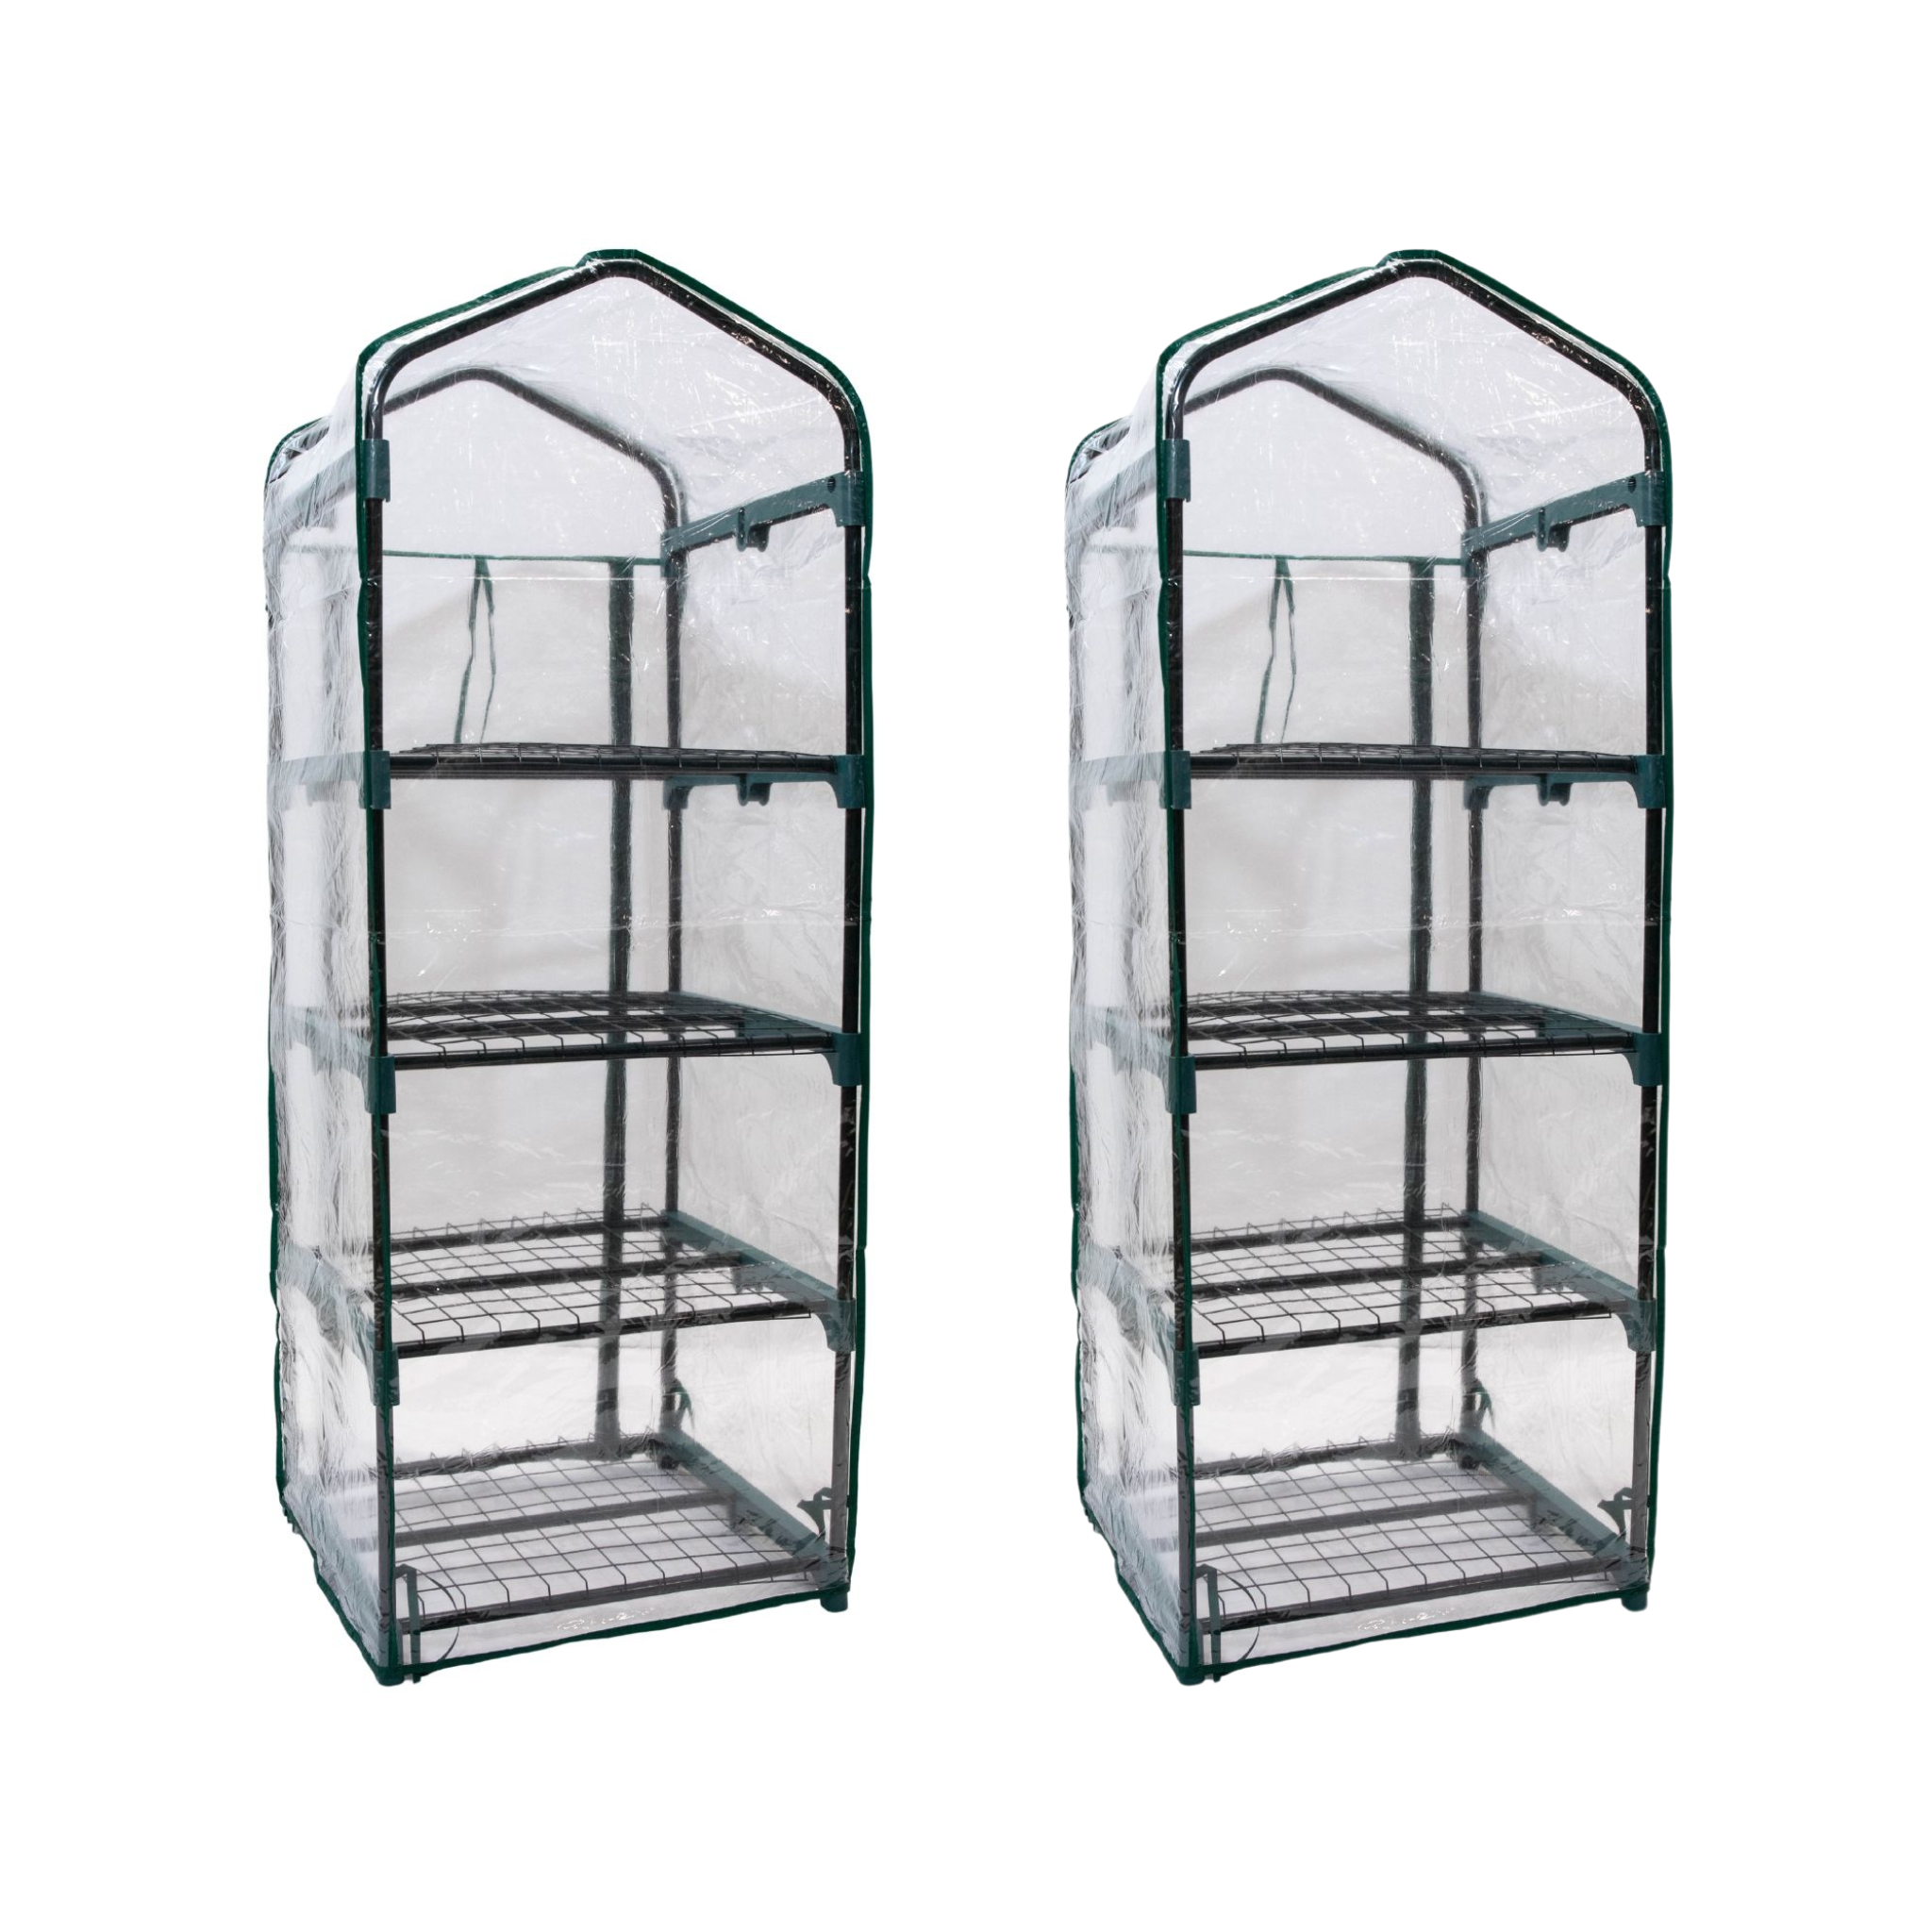 2 Pack of 130m Outdoor Garden Patio Mini Greenhouse with 4 Shelves